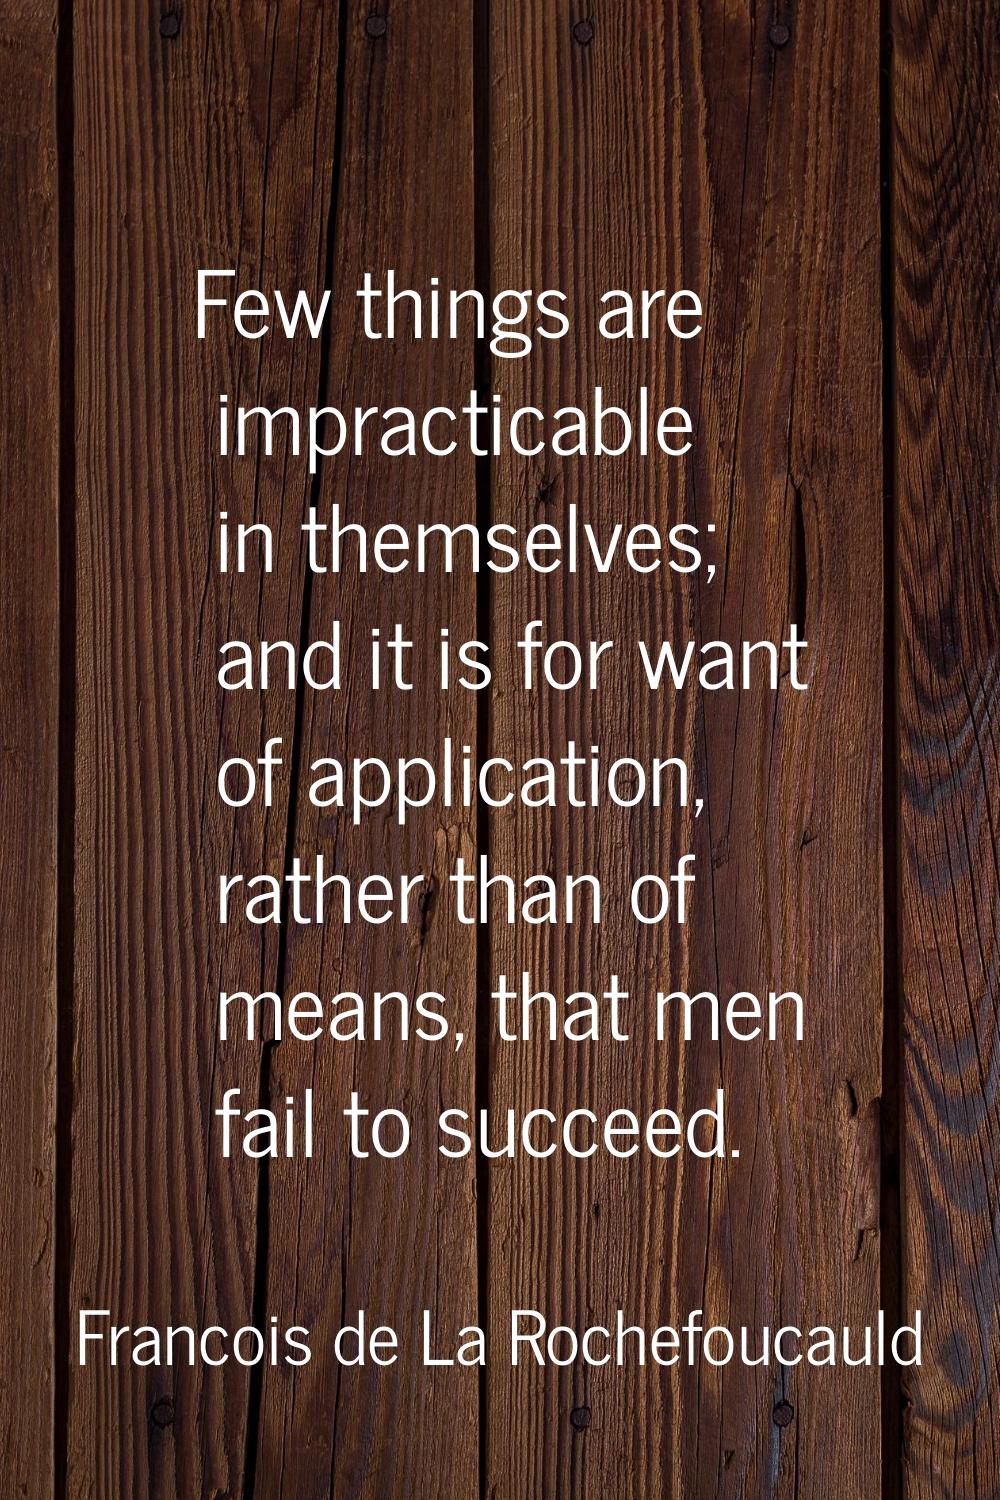 Few things are impracticable in themselves; and it is for want of application, rather than of means